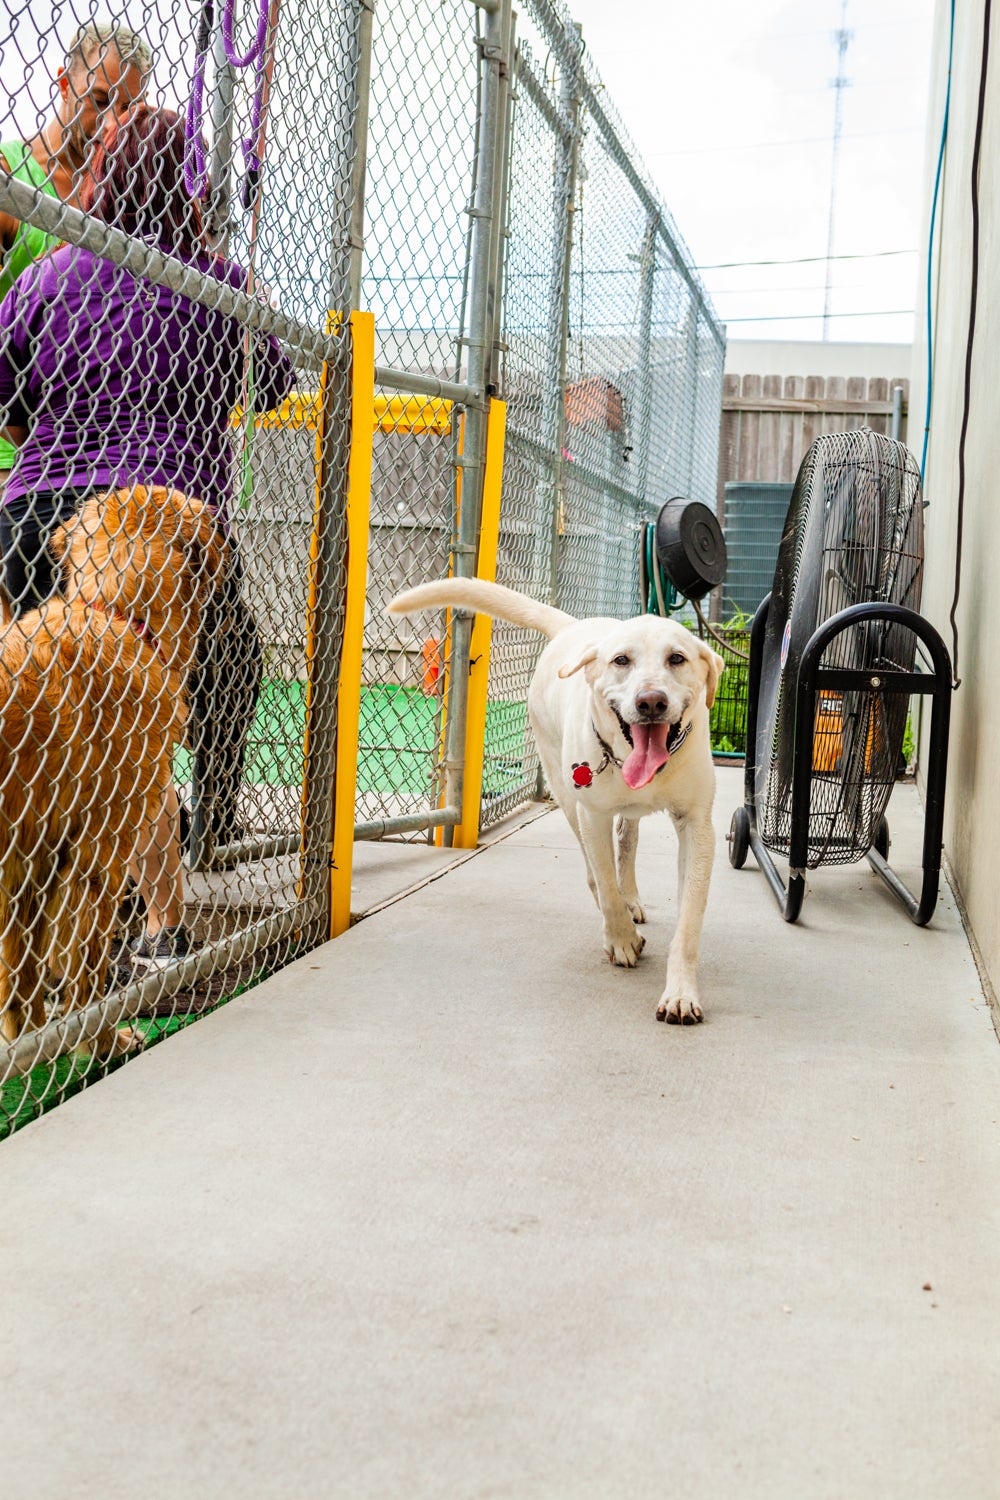 Central Bark Doggy Day Care - Metairie, LA 70001